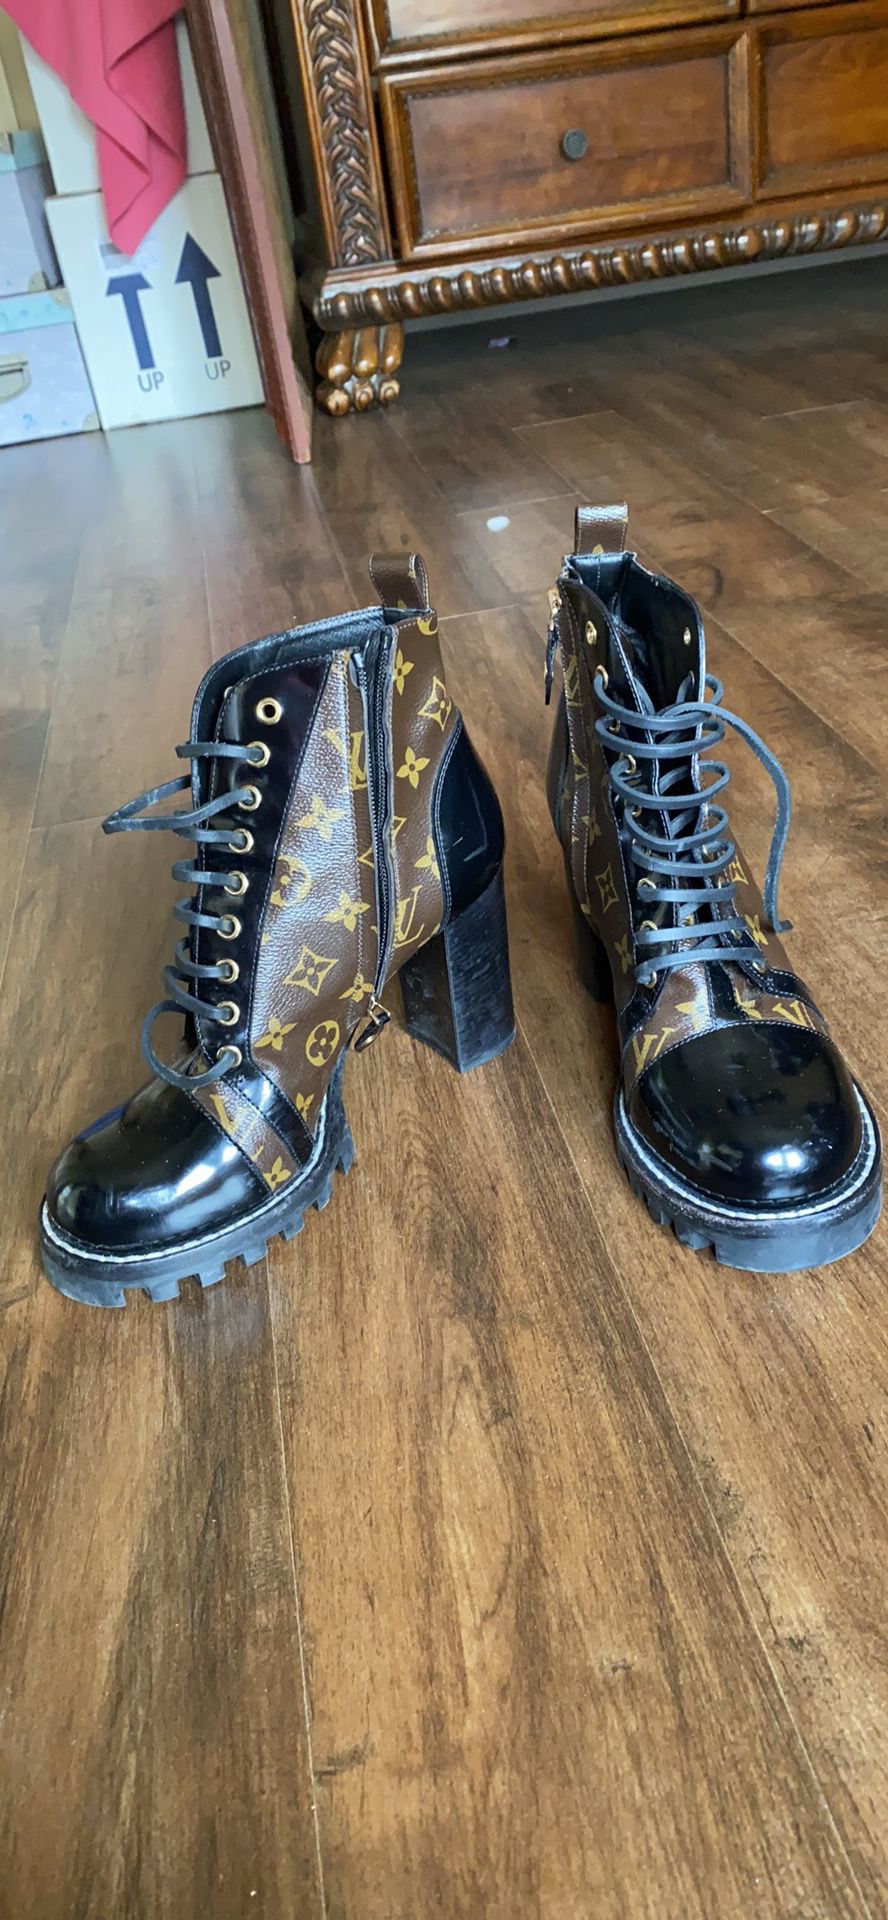 louis vuitton star trail boots to wear with shorts｜TikTok Search